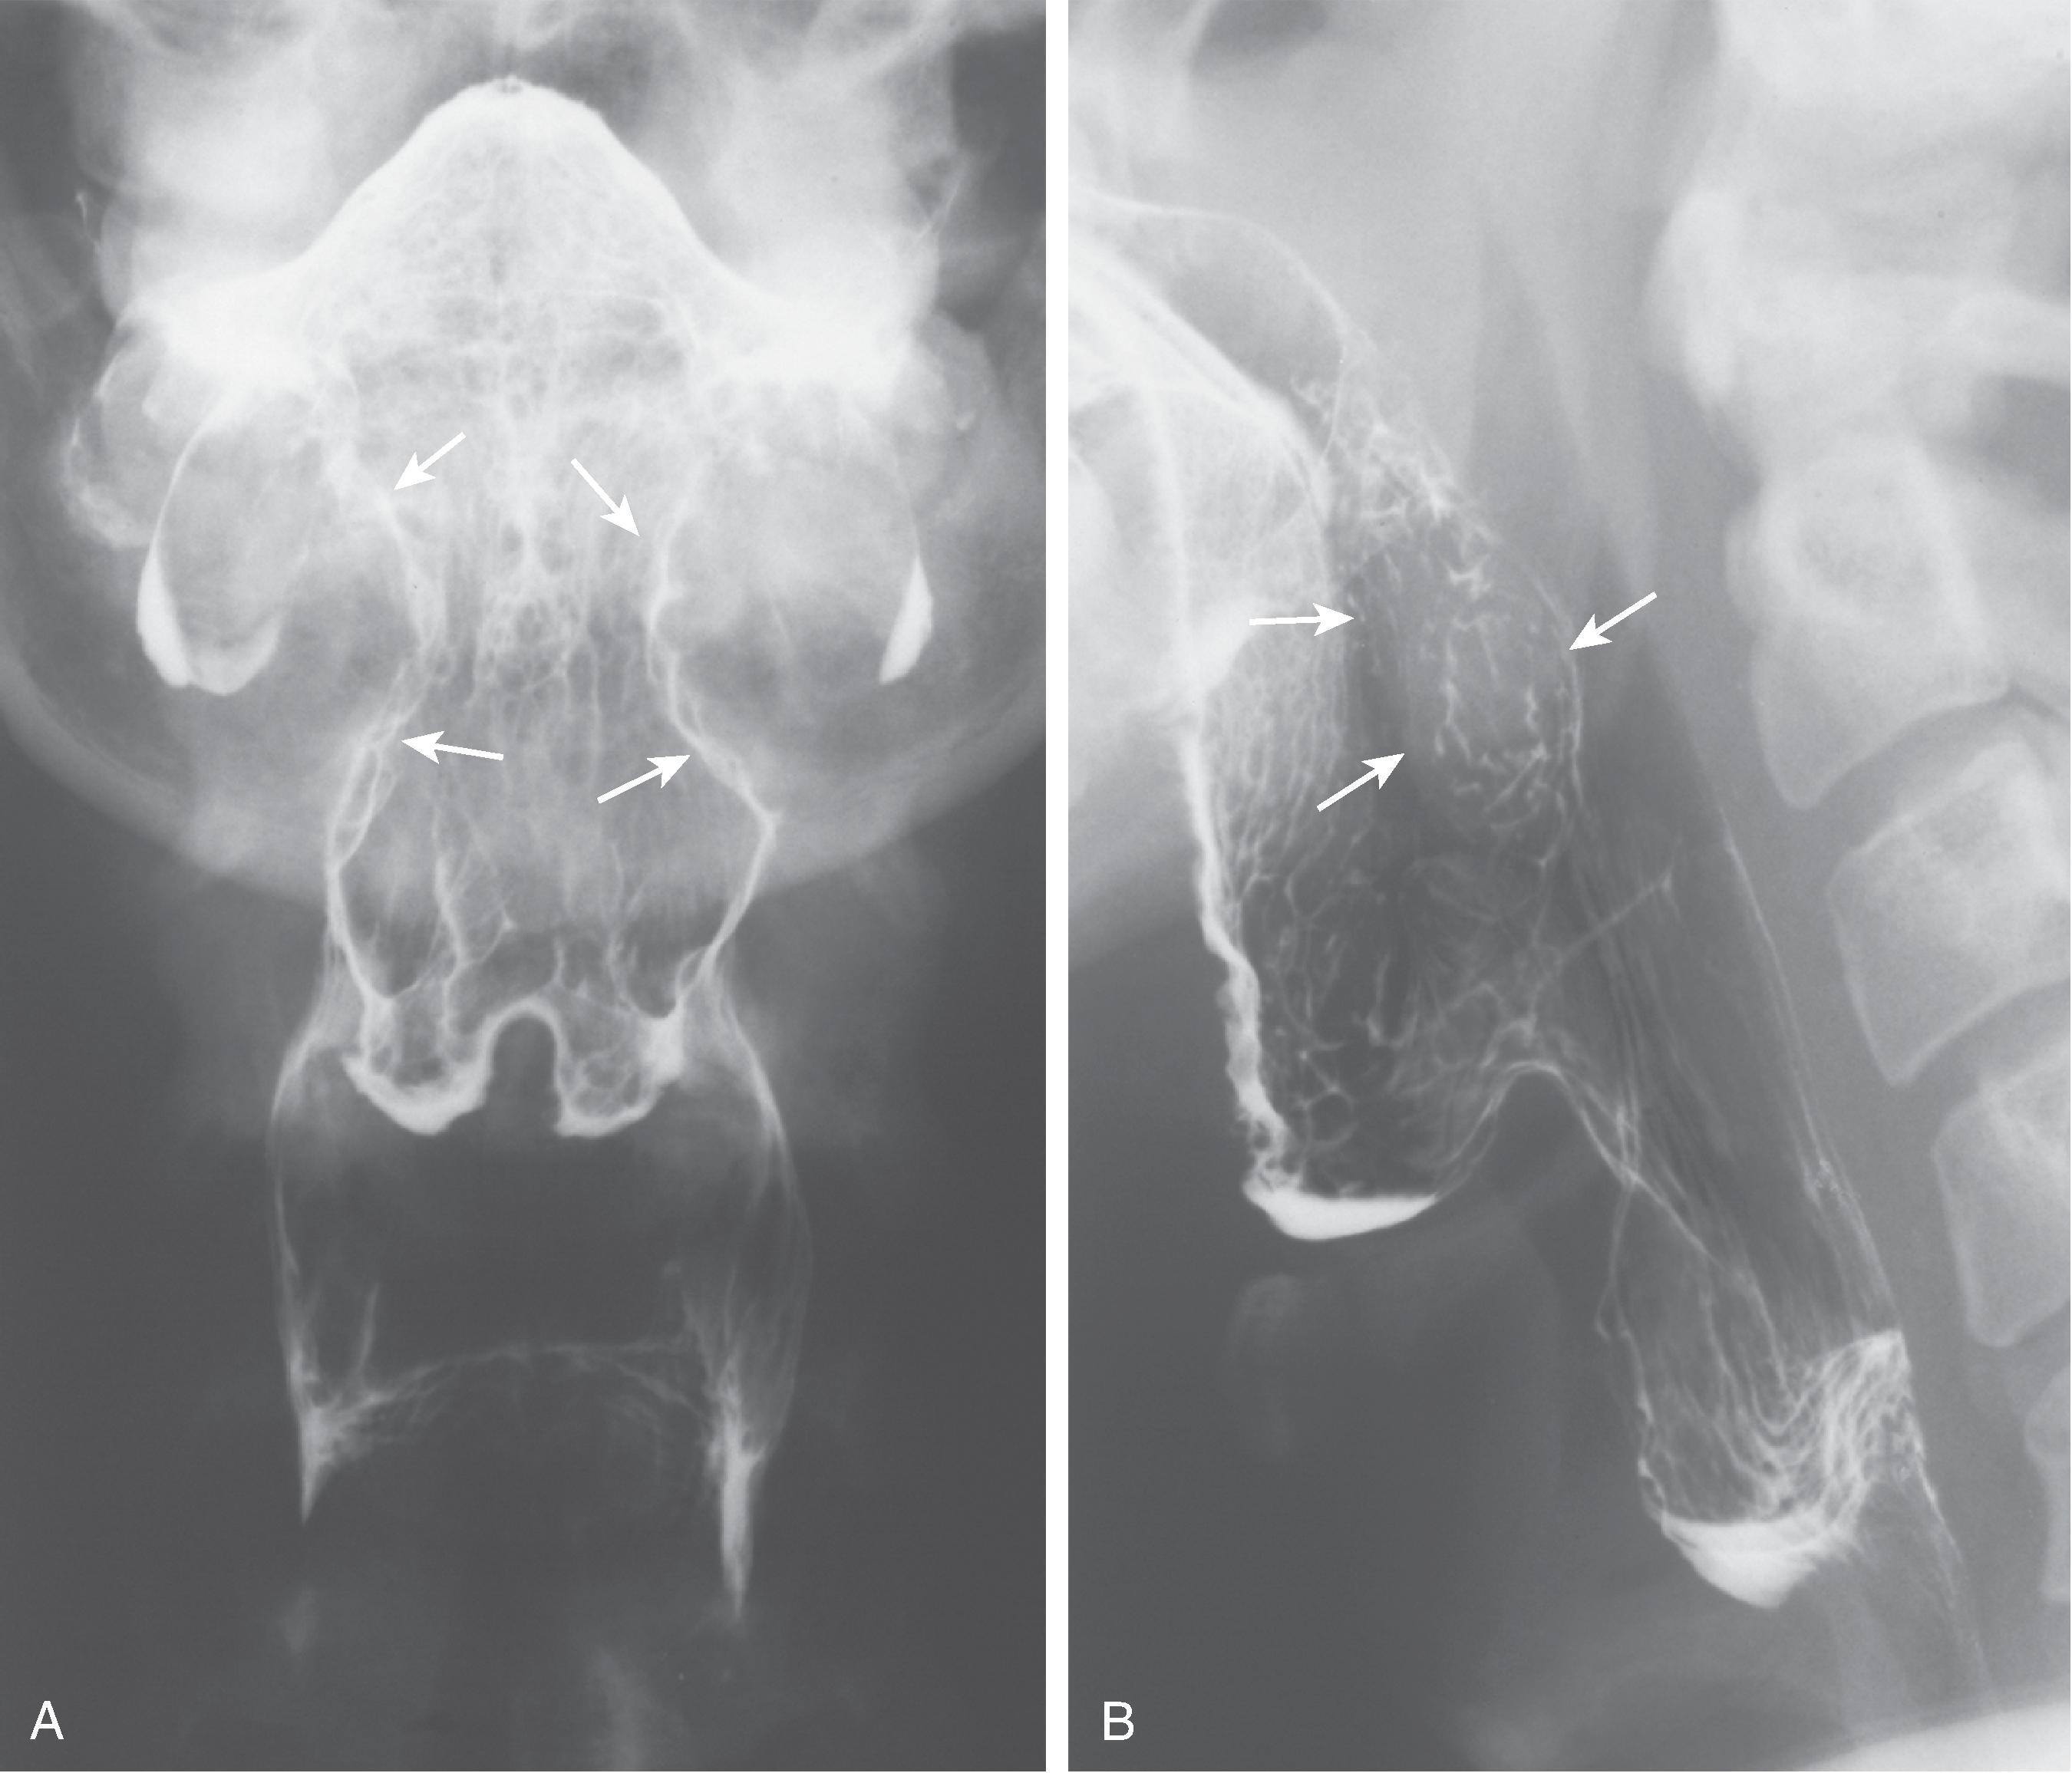 Fig. 5.12, Lymphoid hyperplasia of the palatine tonsils. (A) Frontal and (B) lateral views of the pharynx show symmetrically enlarged palatine tonsils bilaterally ( arrows ).